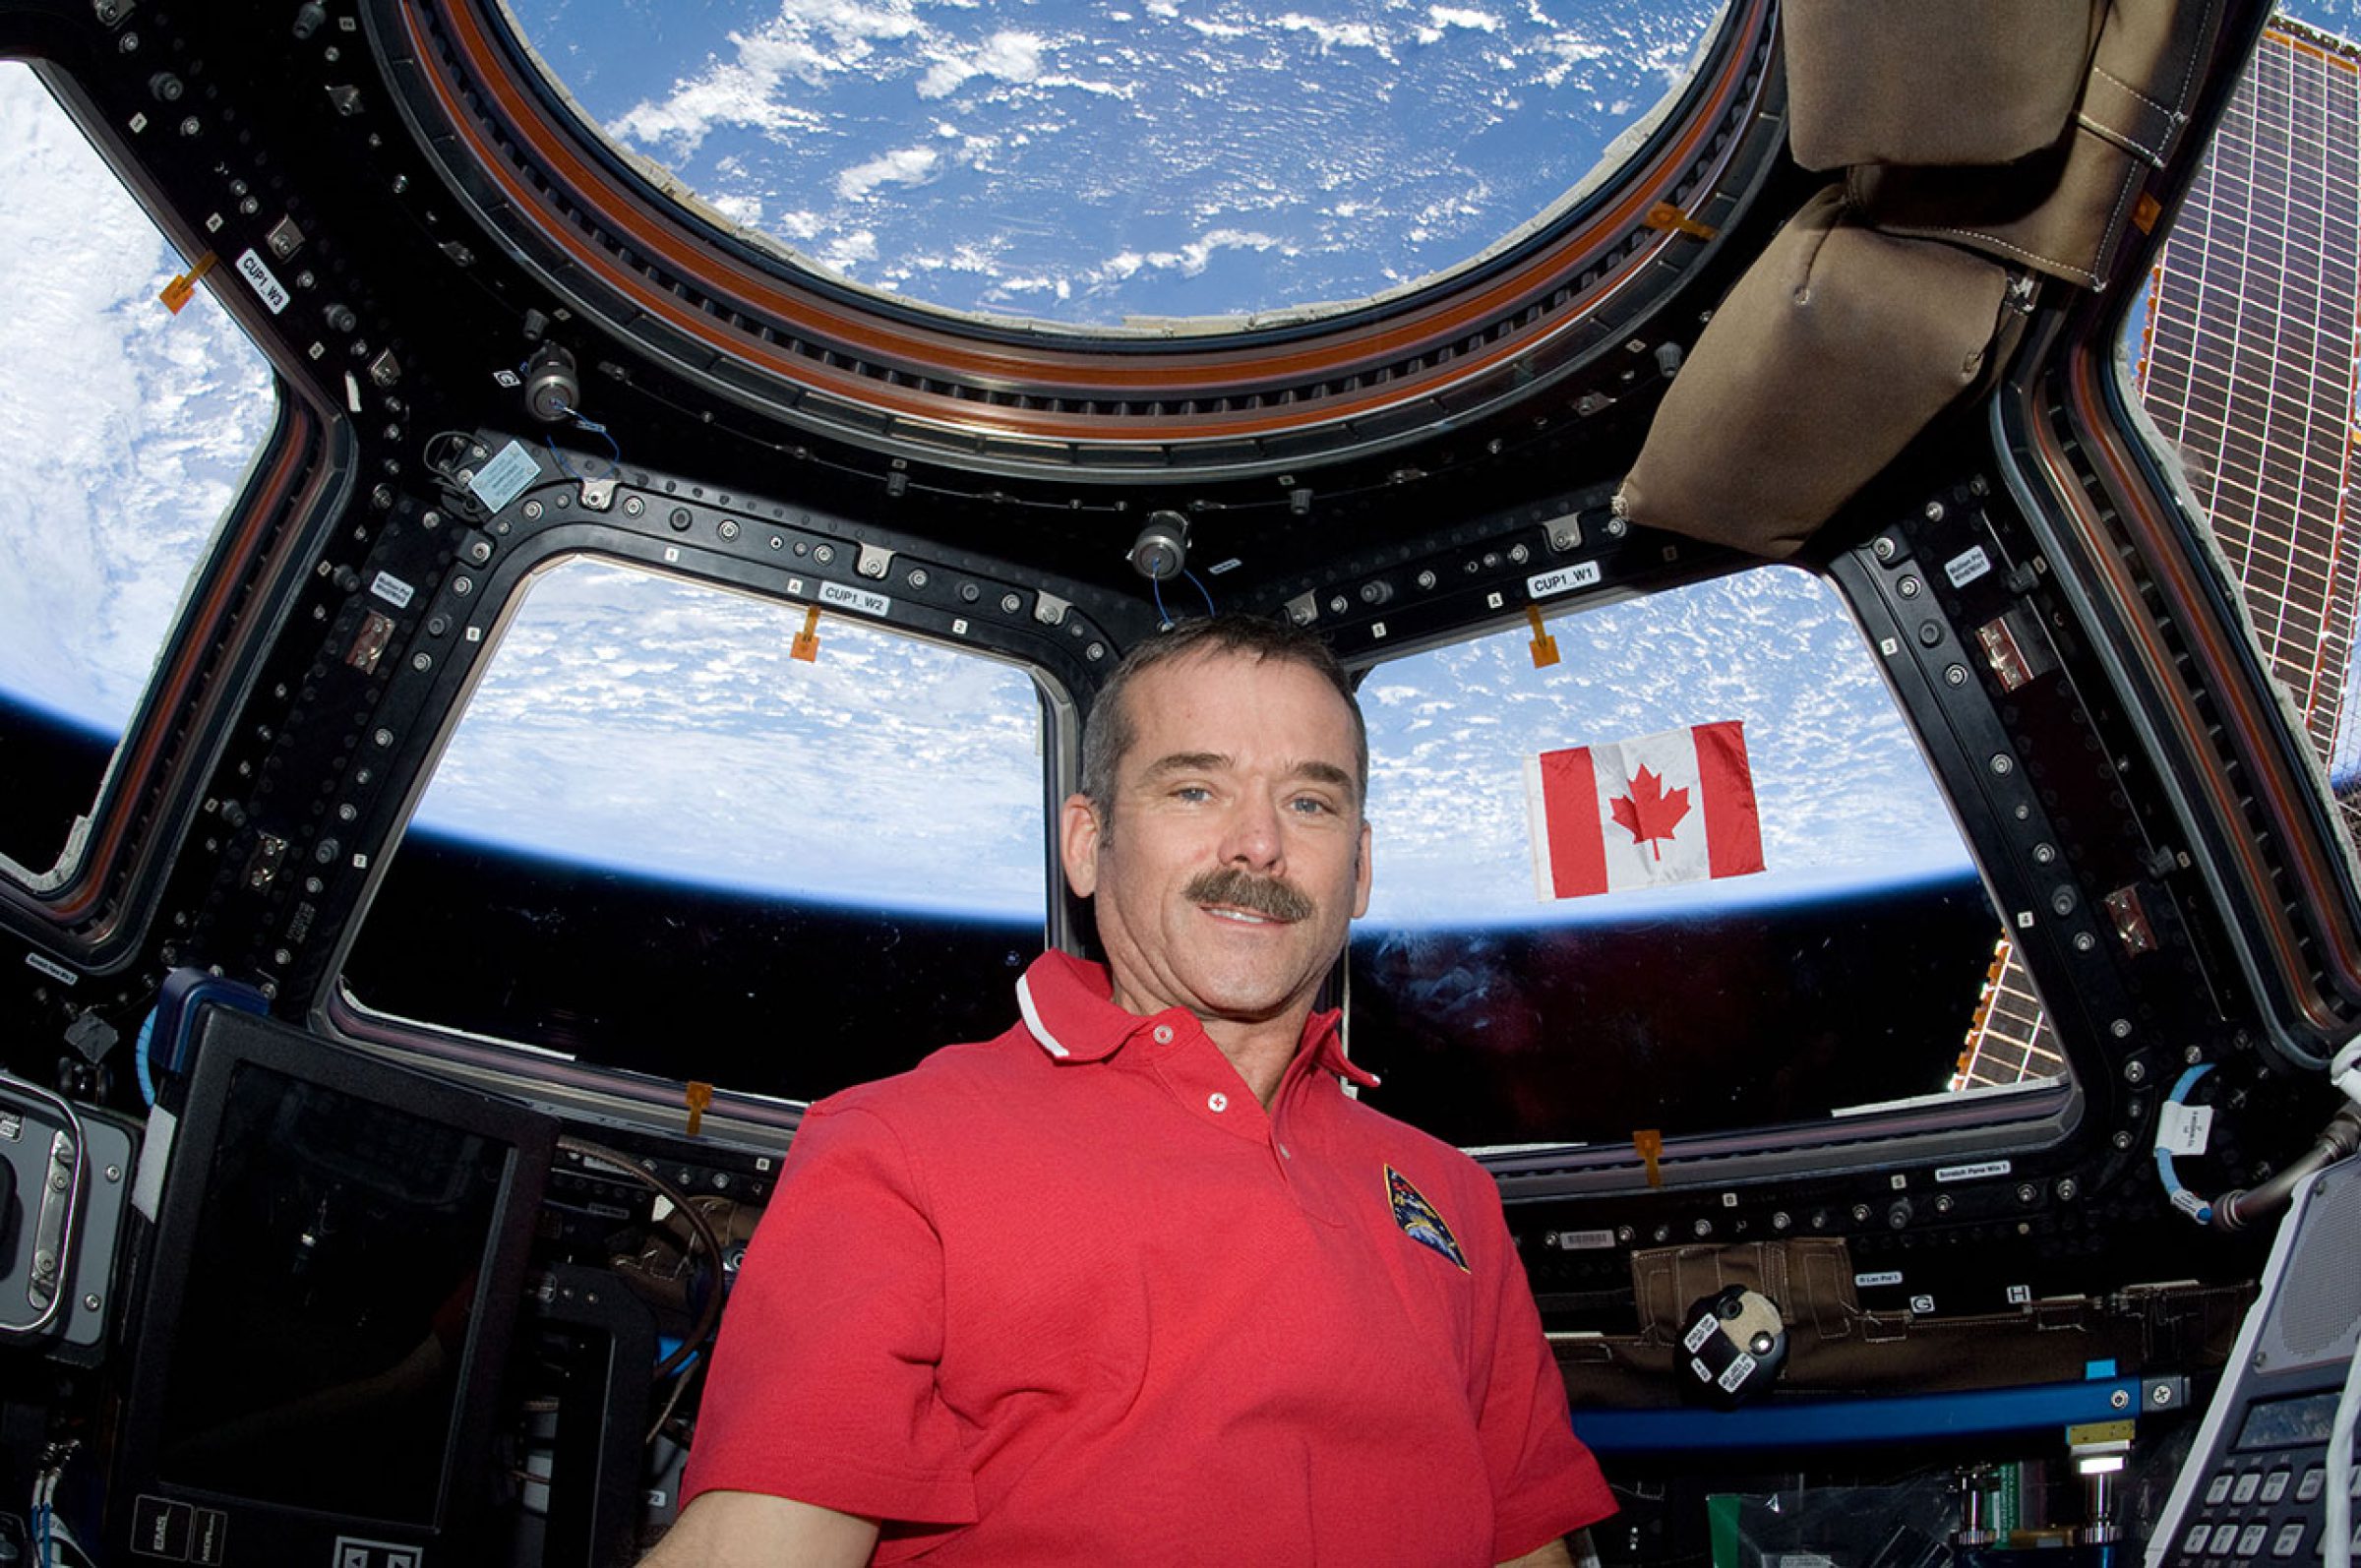 Chris Hadfield in the Cupola